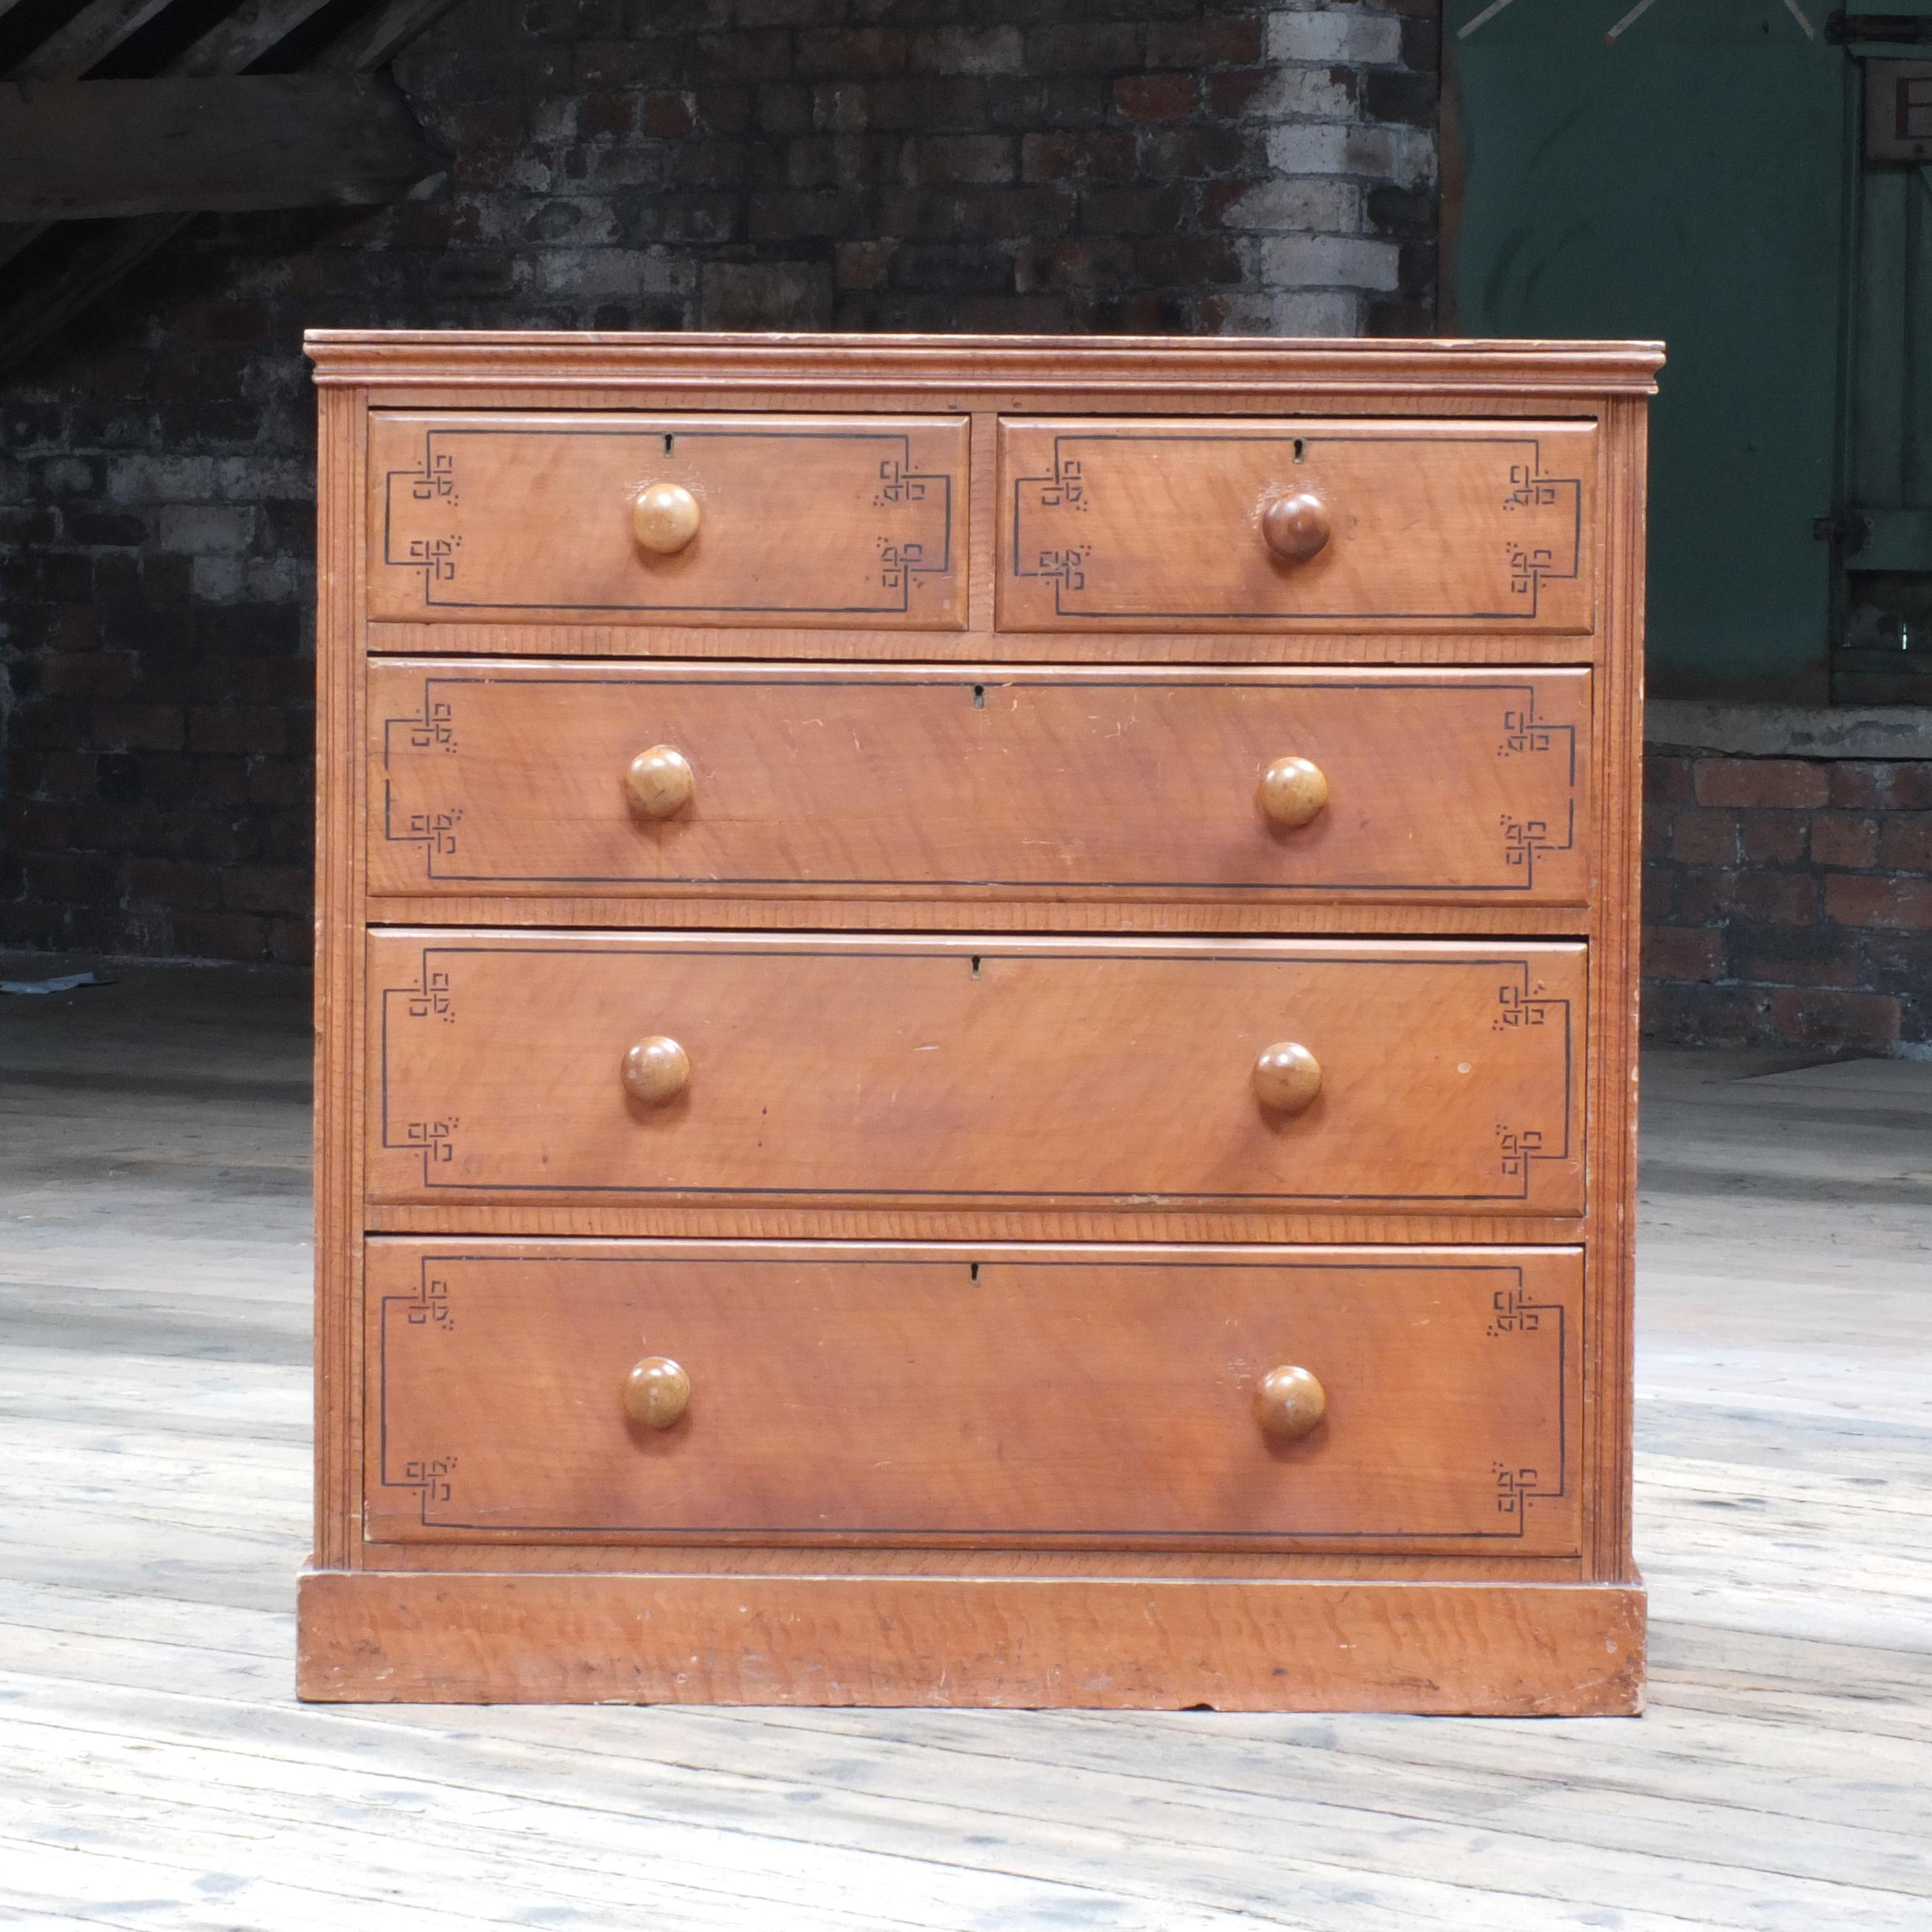 A wonderfully original set of drawers coming out of the aesthetic movement period c1870-1890. This set is particularly well done painted in a simulated satin birch and with black pin strip details. In excellent condition both inside and out!